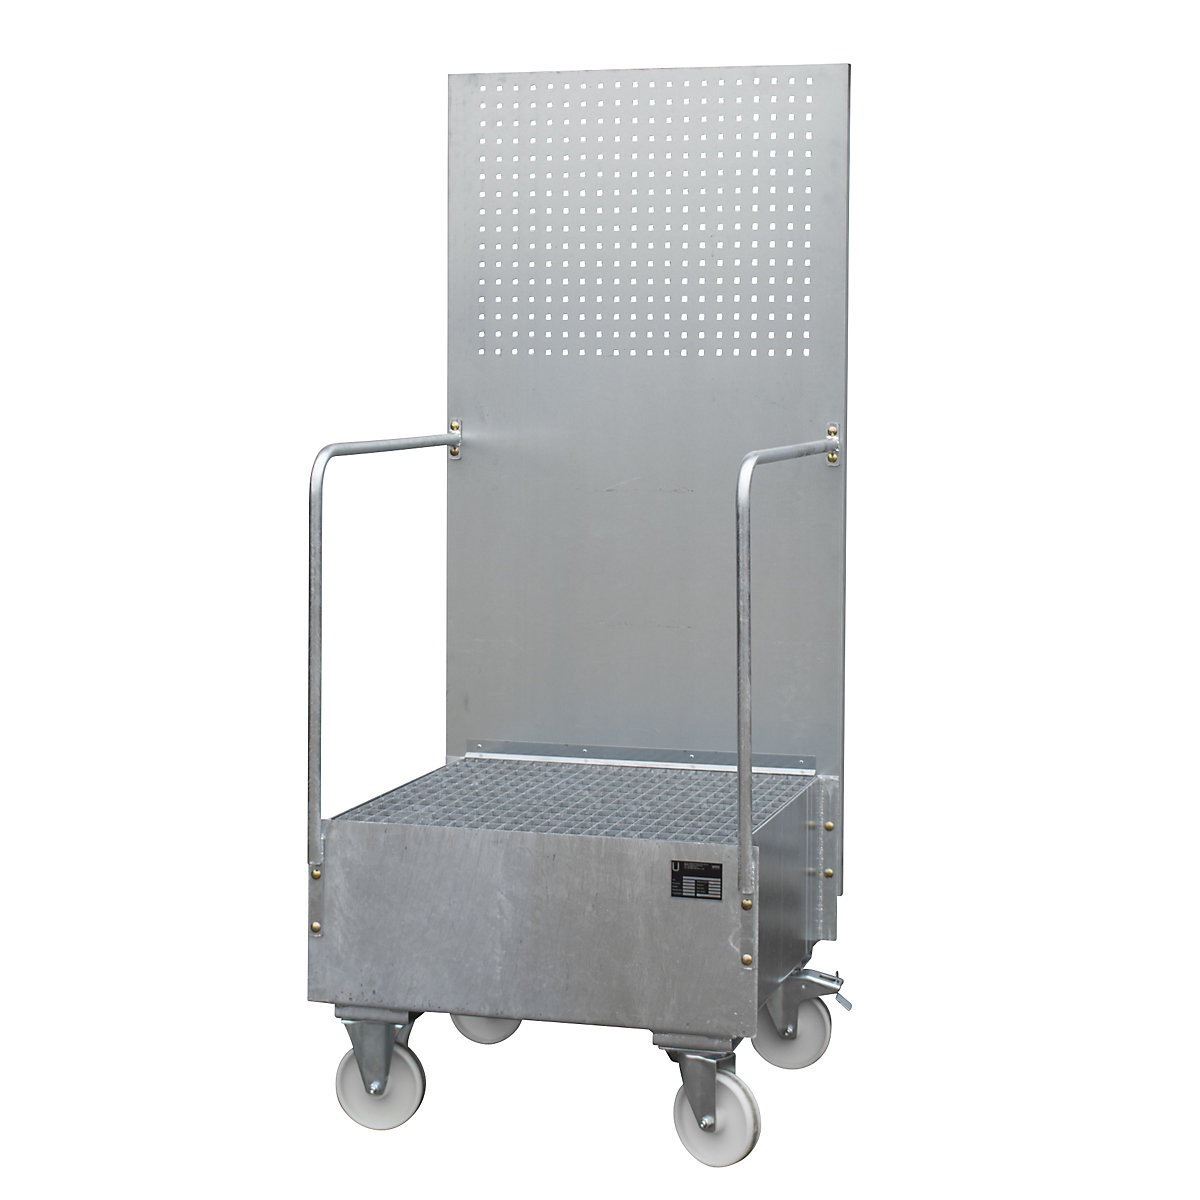 Mobile sump tray with perforated panel – eurokraft pro, 1 x 200 l drum placed upright, LxWxH 870 x 890 x 2110 mm, hot dip galvanised-1